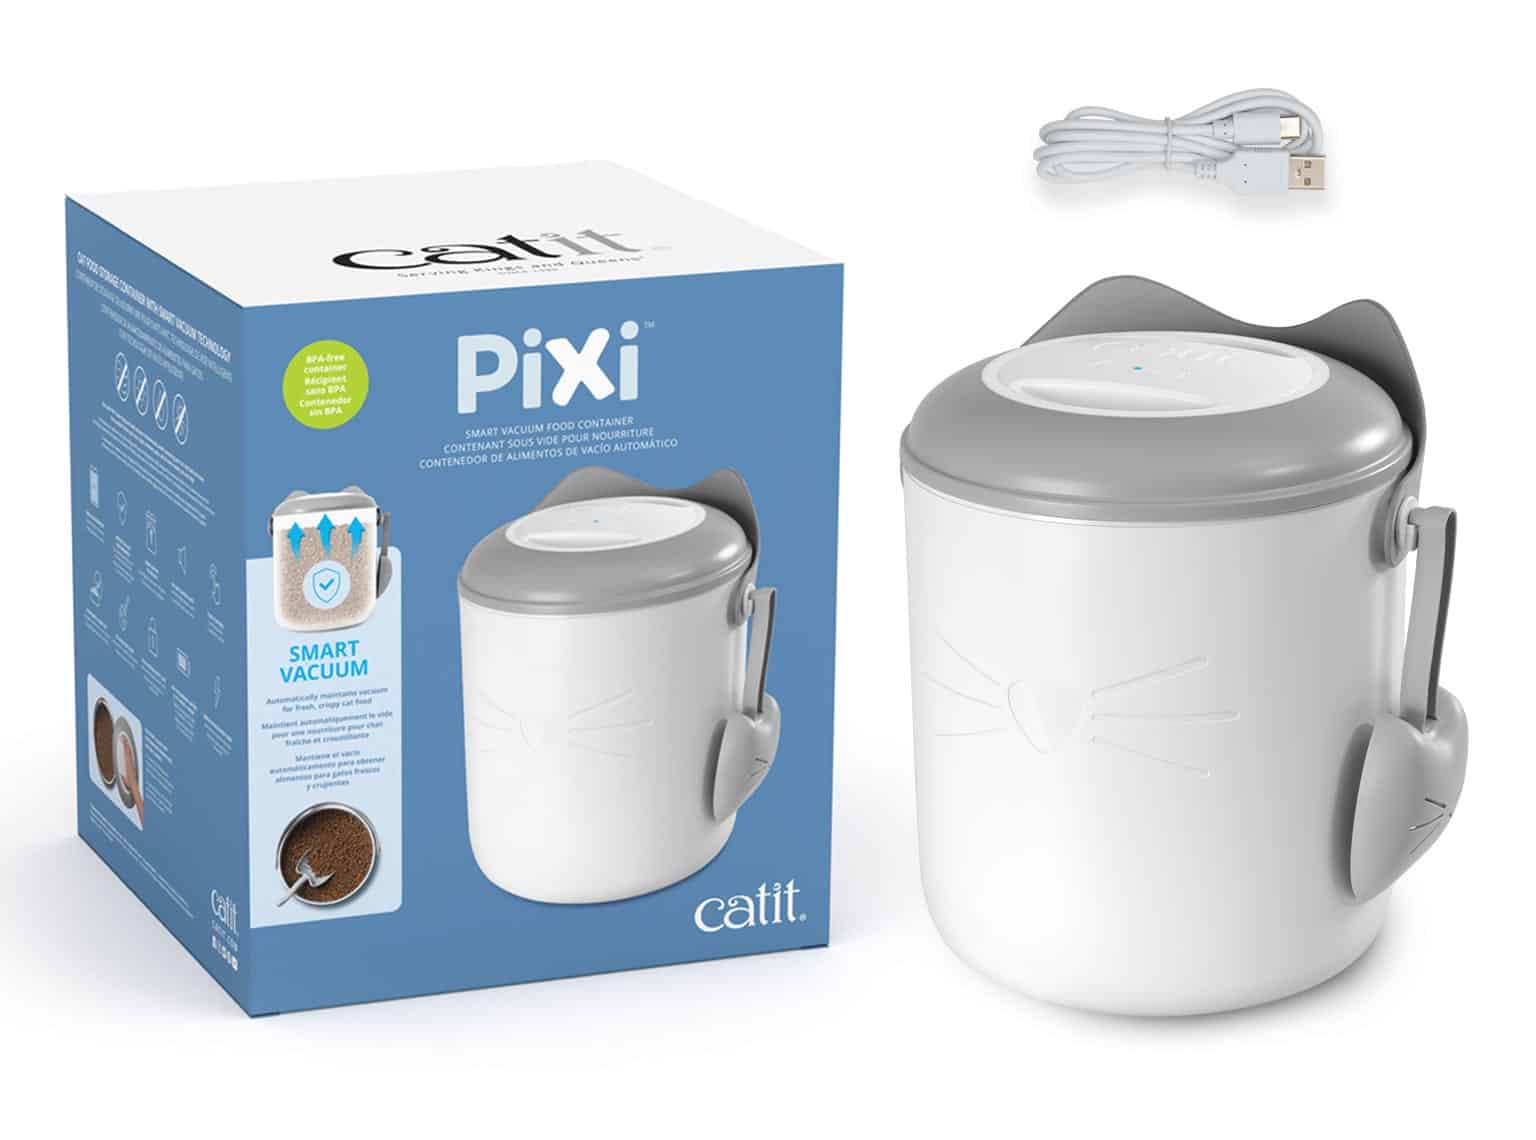 Whats in the PIXI Smart Vacuum Food Container box